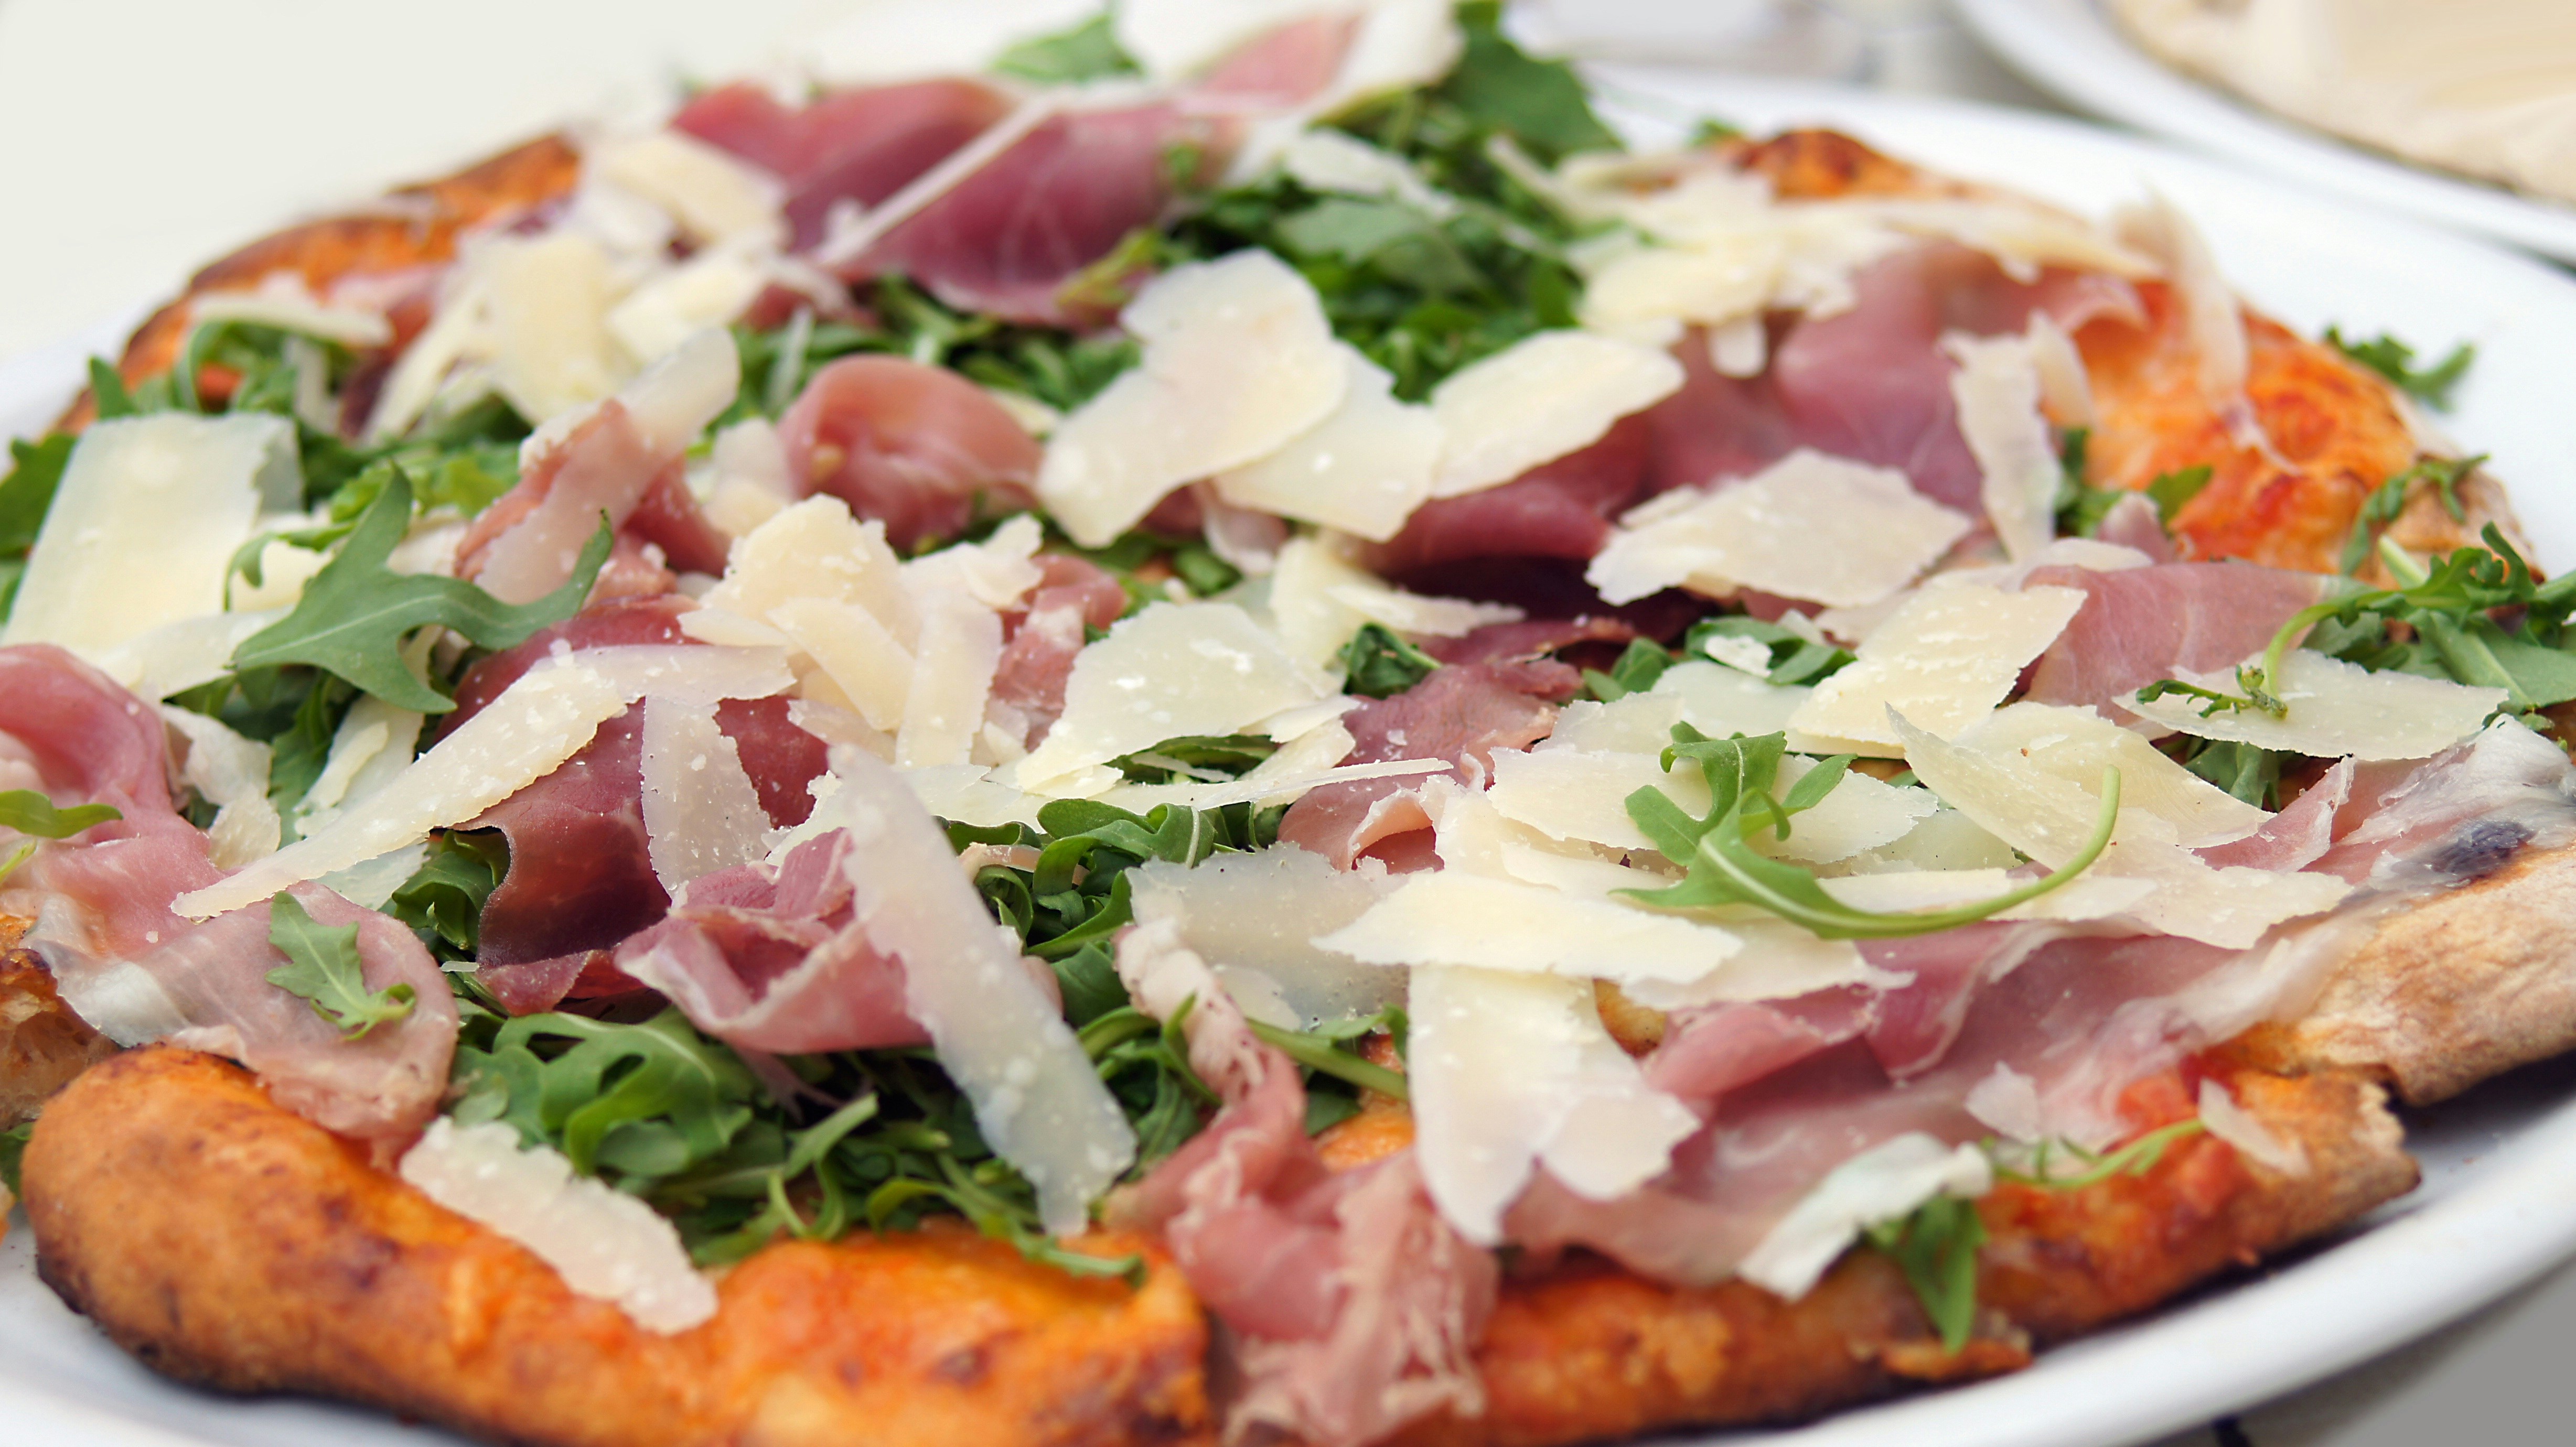 An arugula, ham and cheese pizza from Napoli